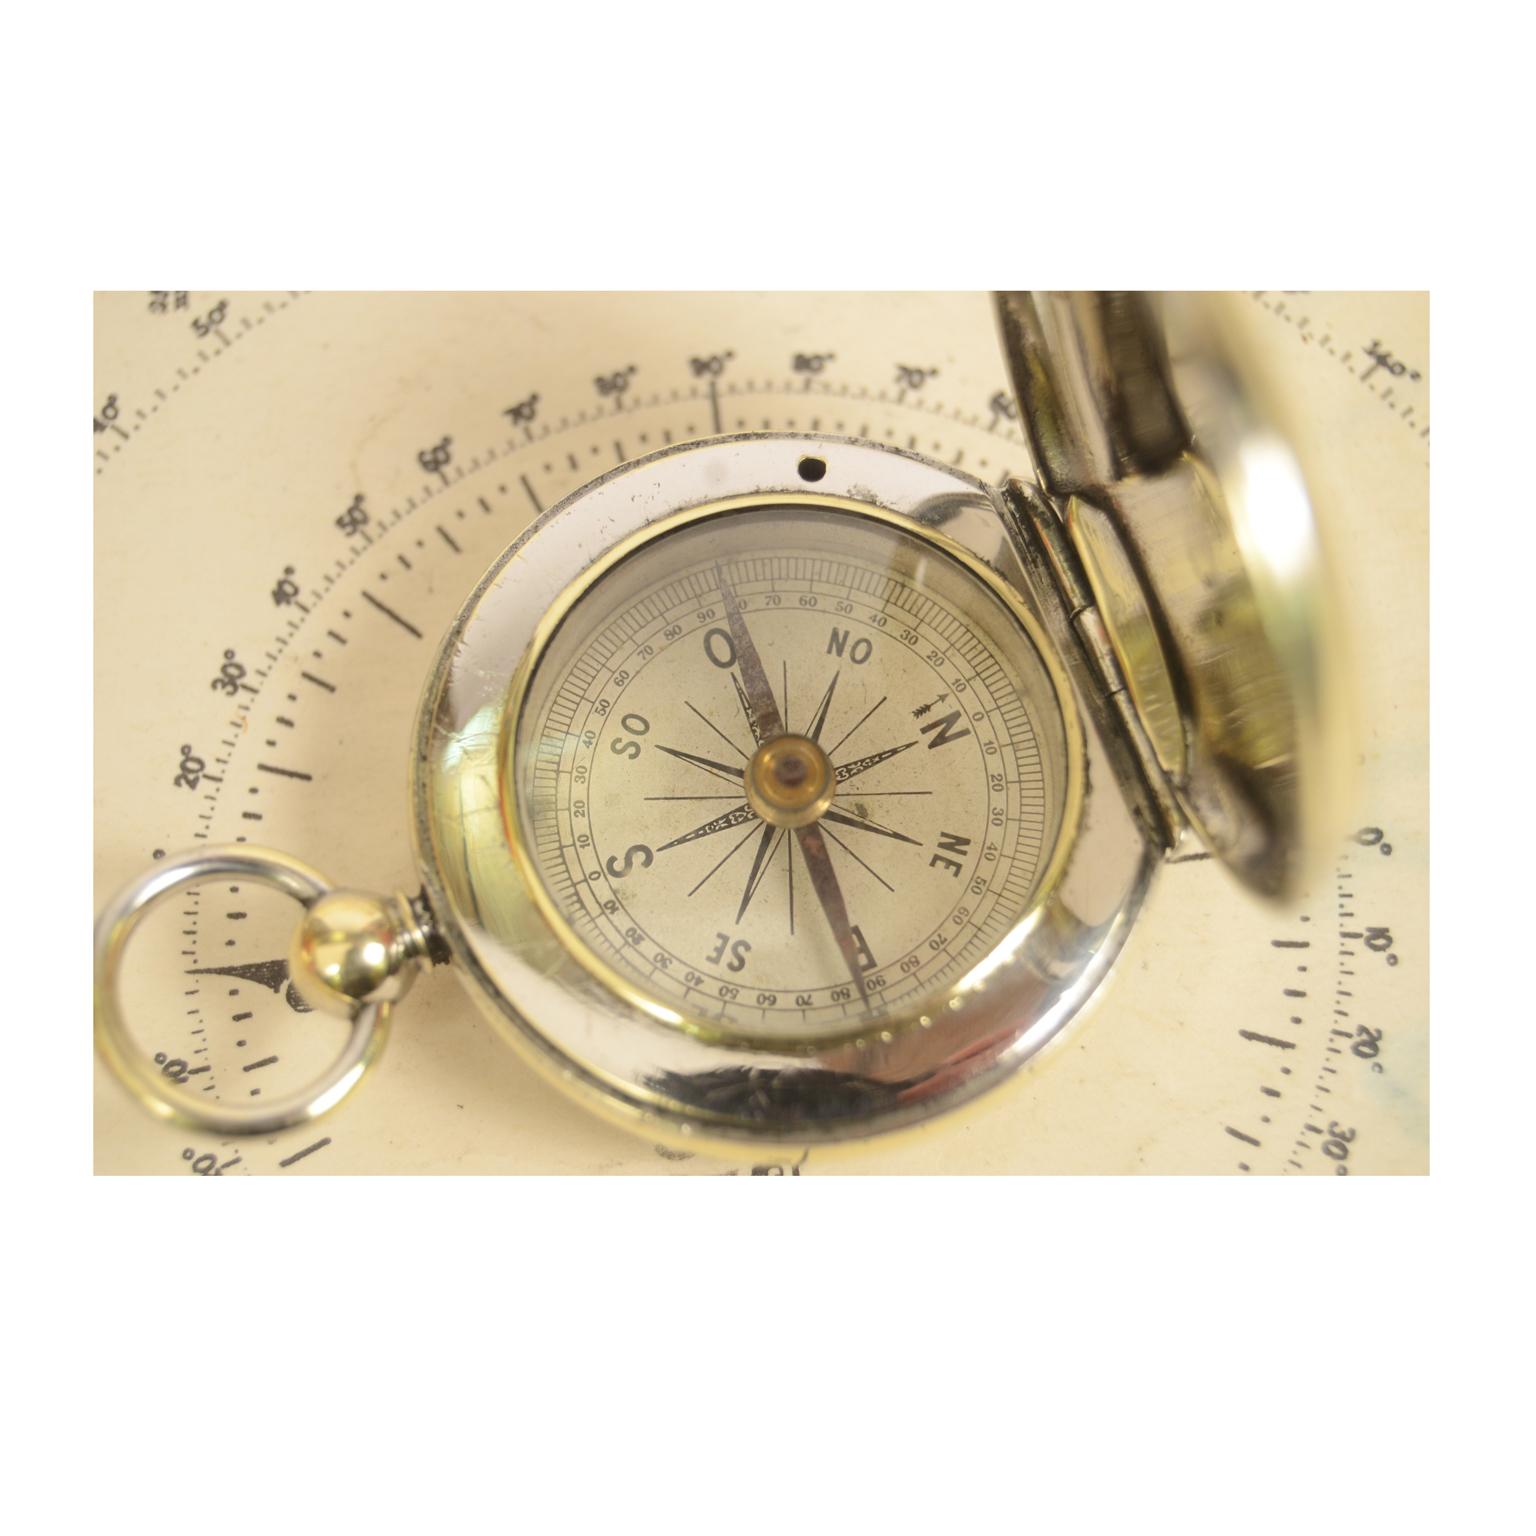 who invented compass